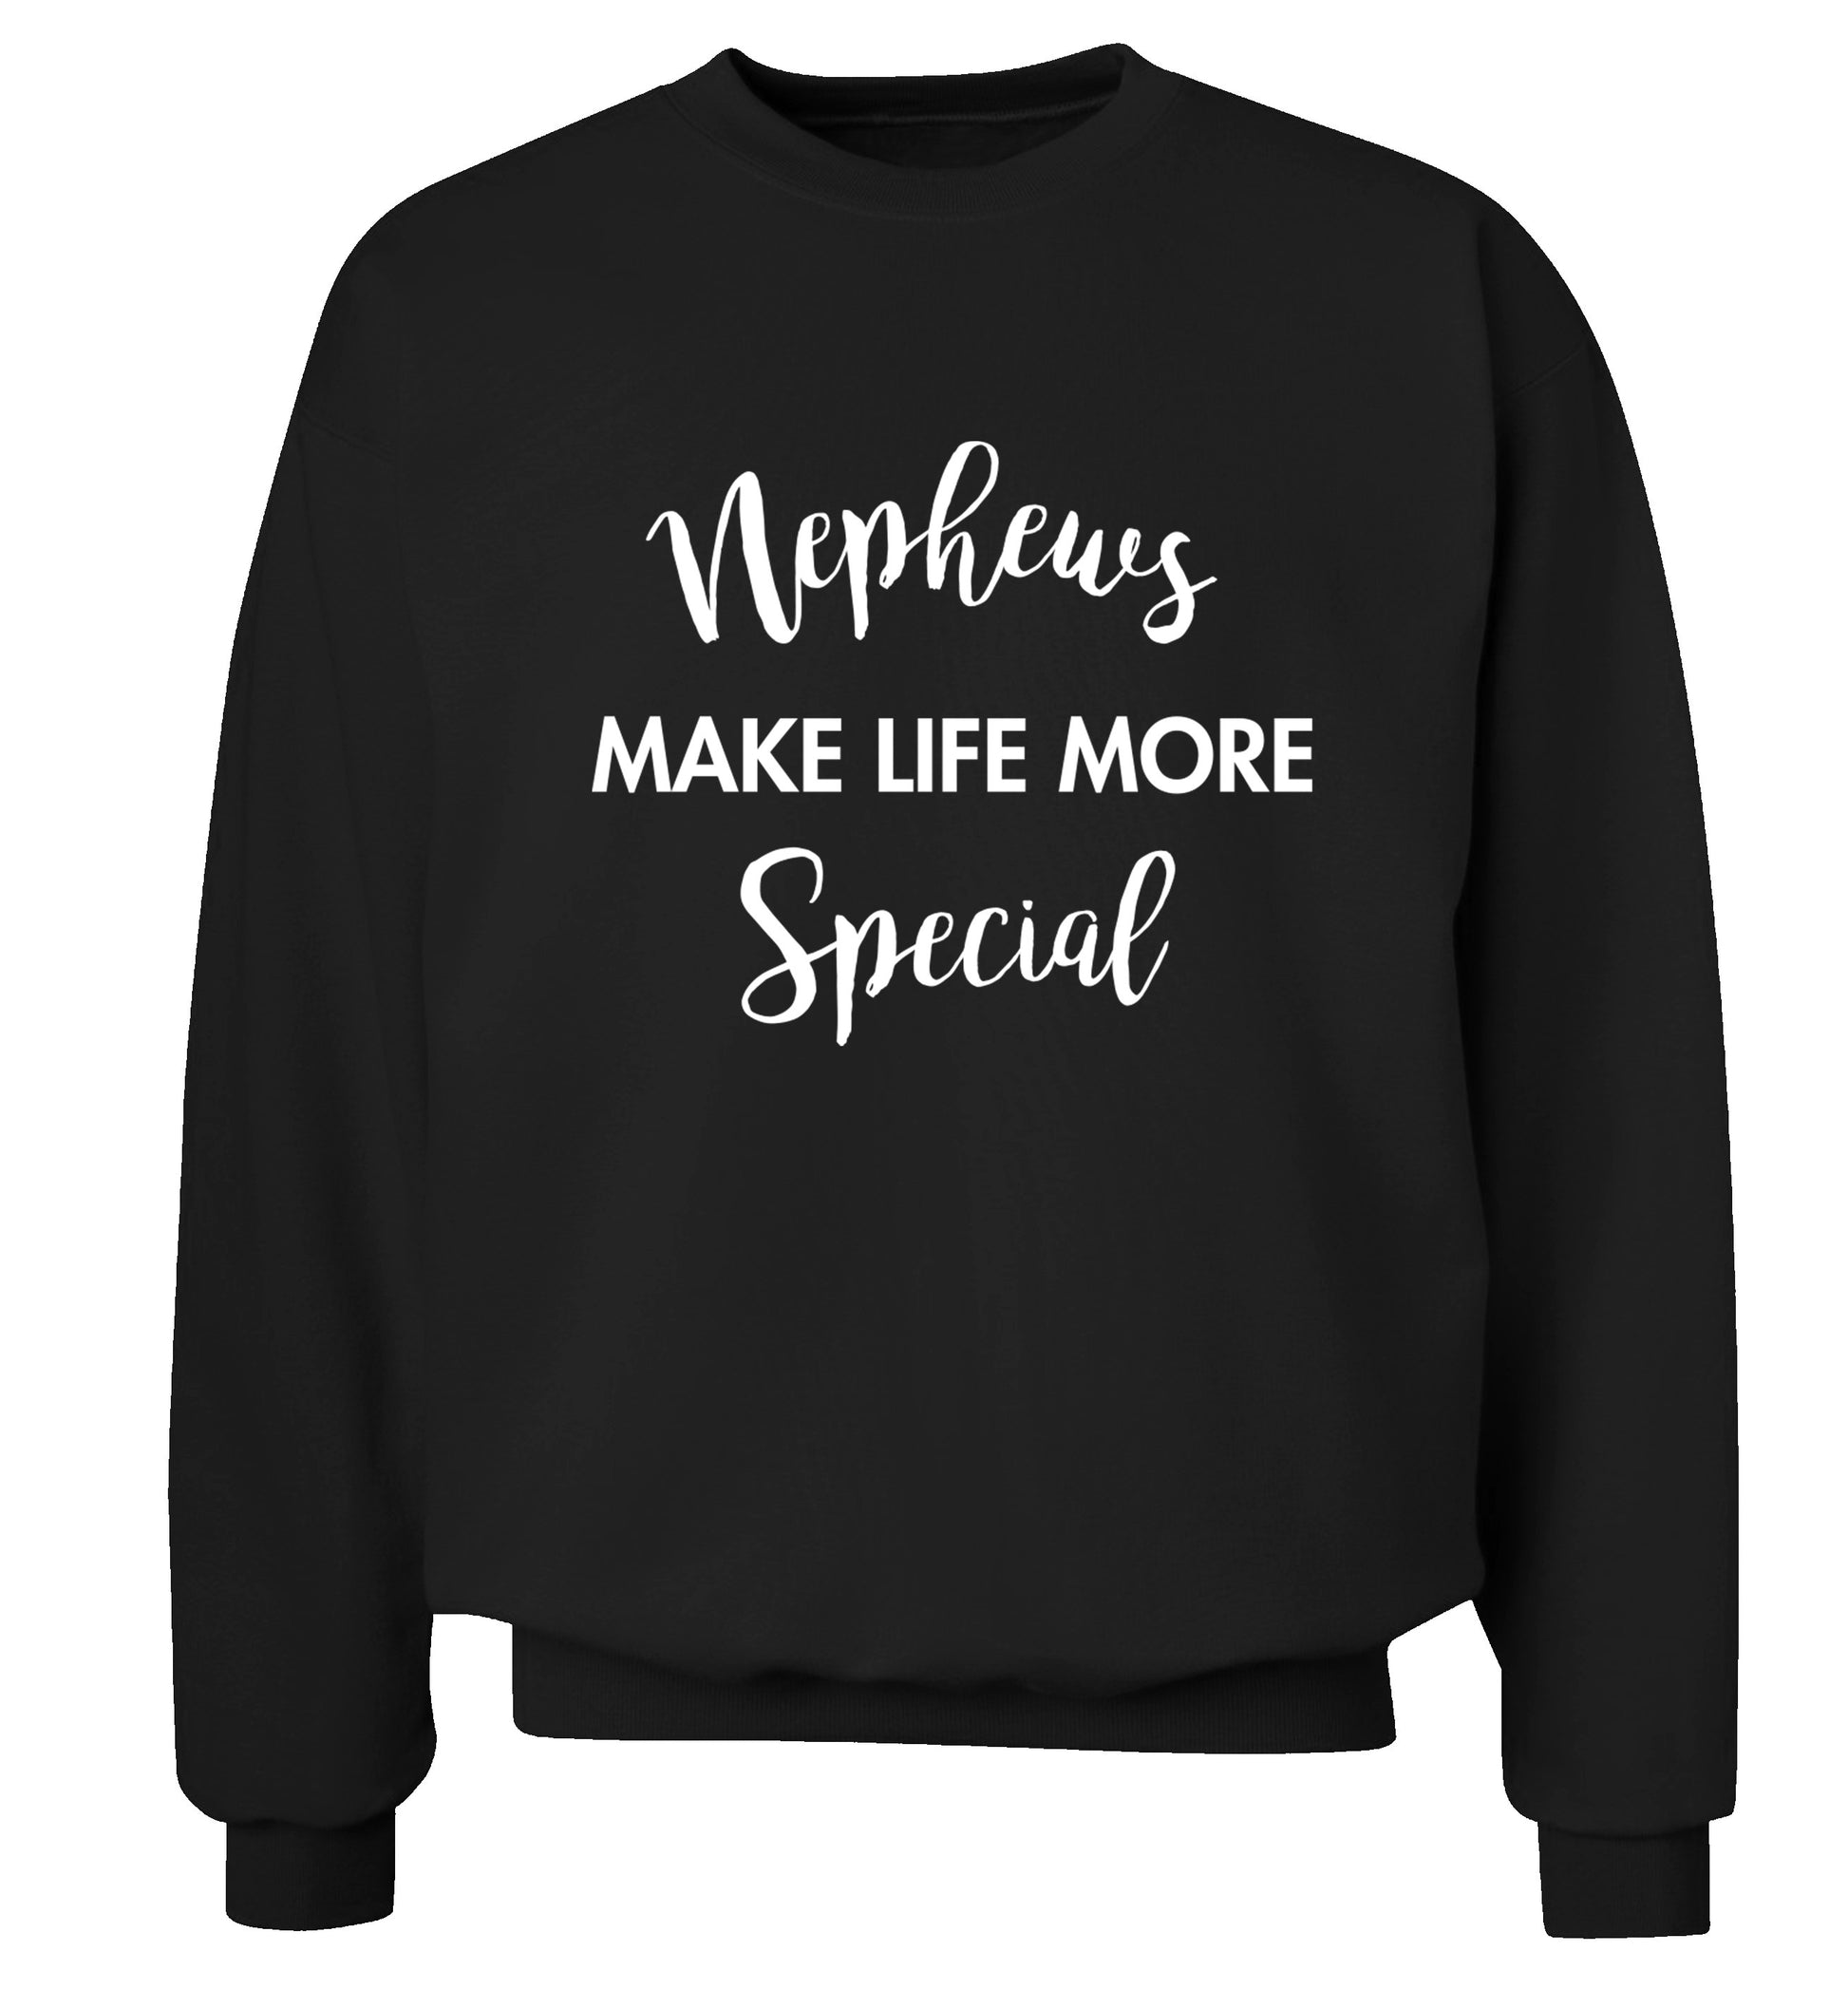 Nephews make life more special Adult's unisex black Sweater 2XL